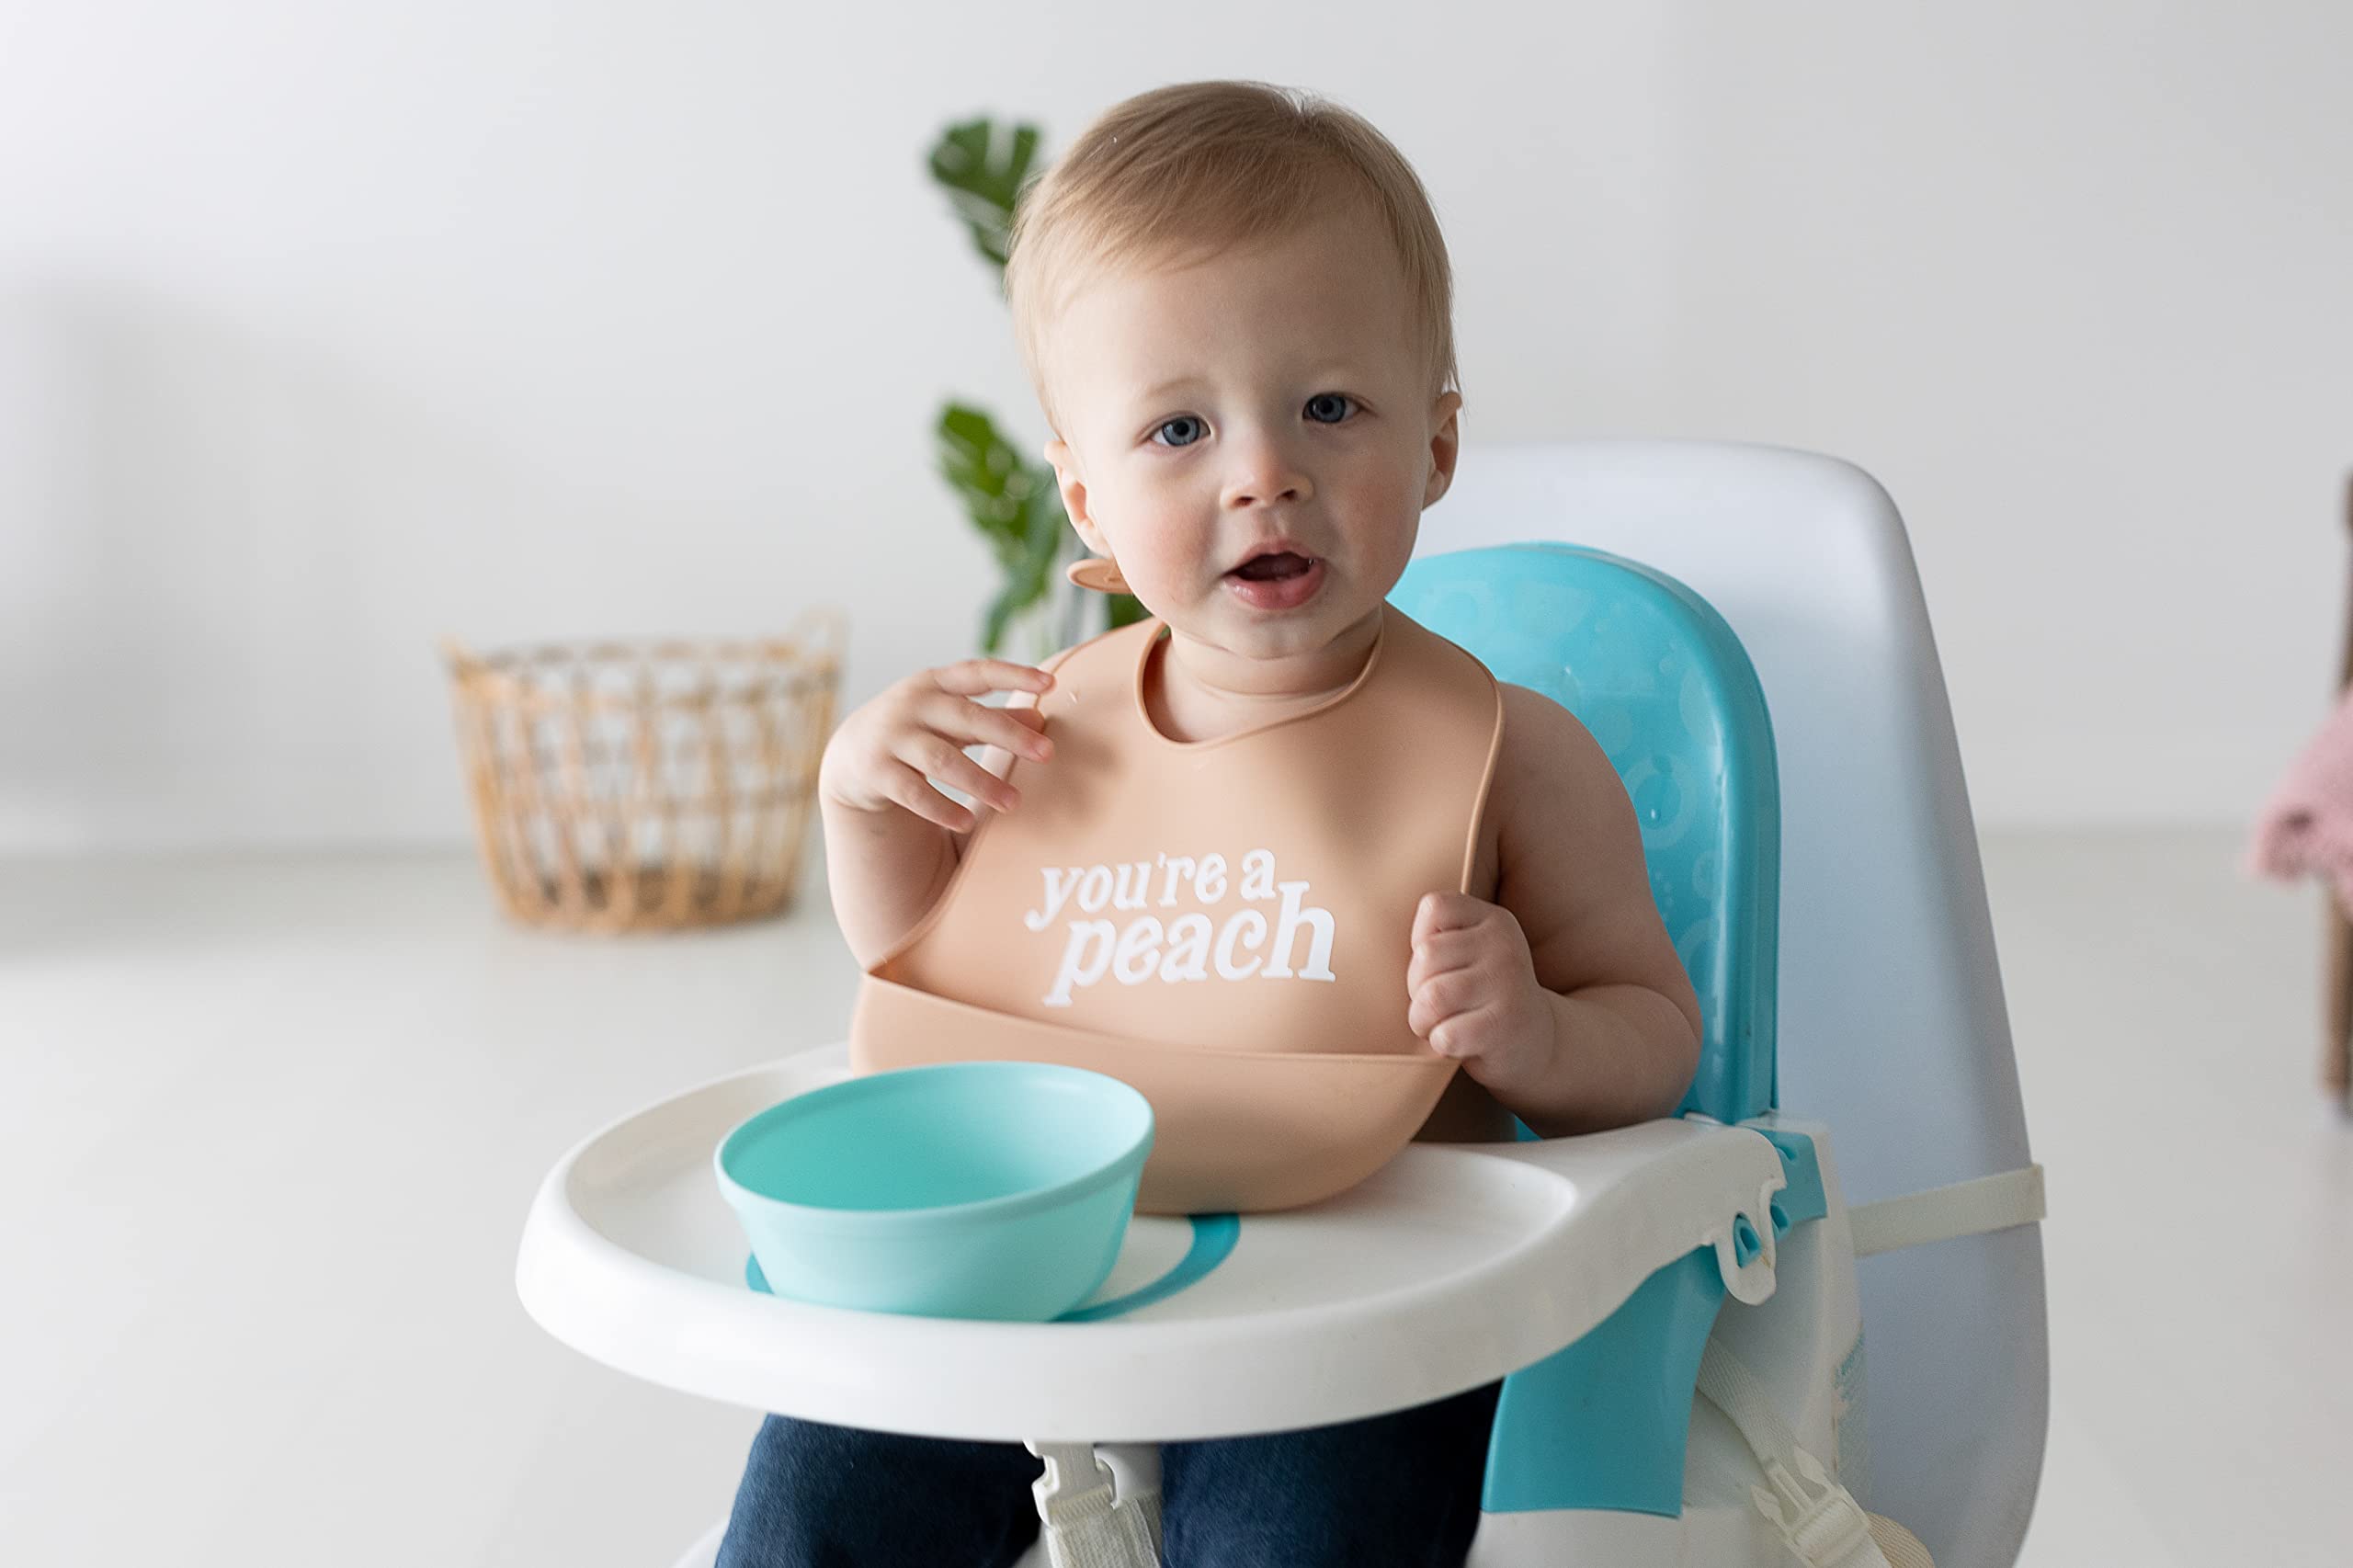 Pearhead Silicone Bib Set of 2, You're a Peach Dishwasher Safe Bibs with Food Catcher, Earth Tone Baby Bib Set, Baby Feeding Accessory for New Parents and Expecting Parents, 2 Baby Bibs